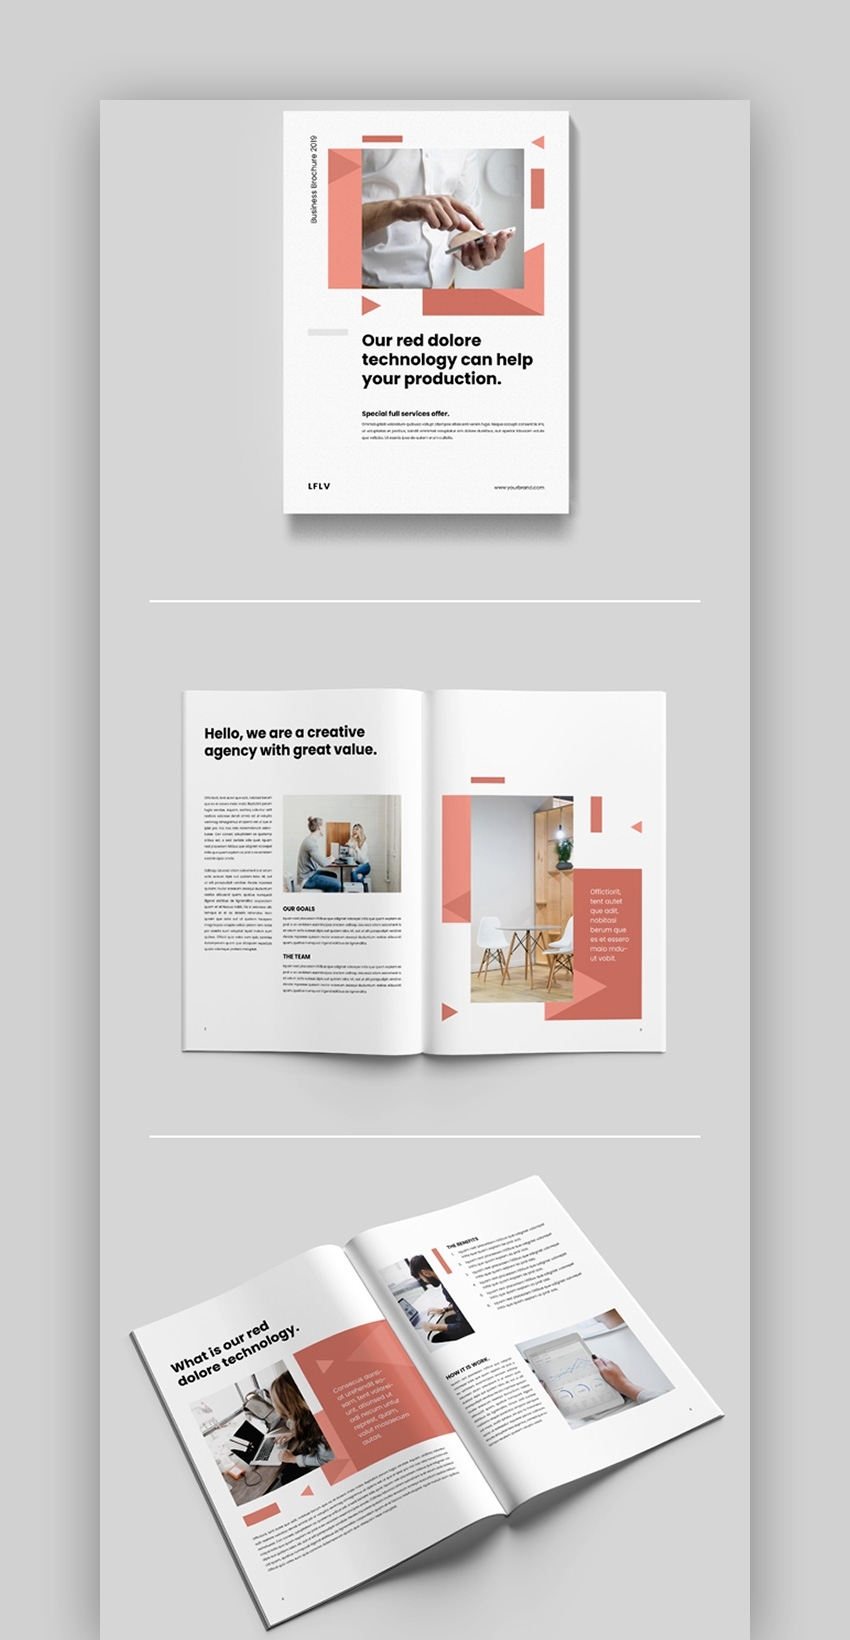 35 Best Indesign Brochure Templates – Creative Business Marketing (2020) With Adobe Indesign Brochure Templates